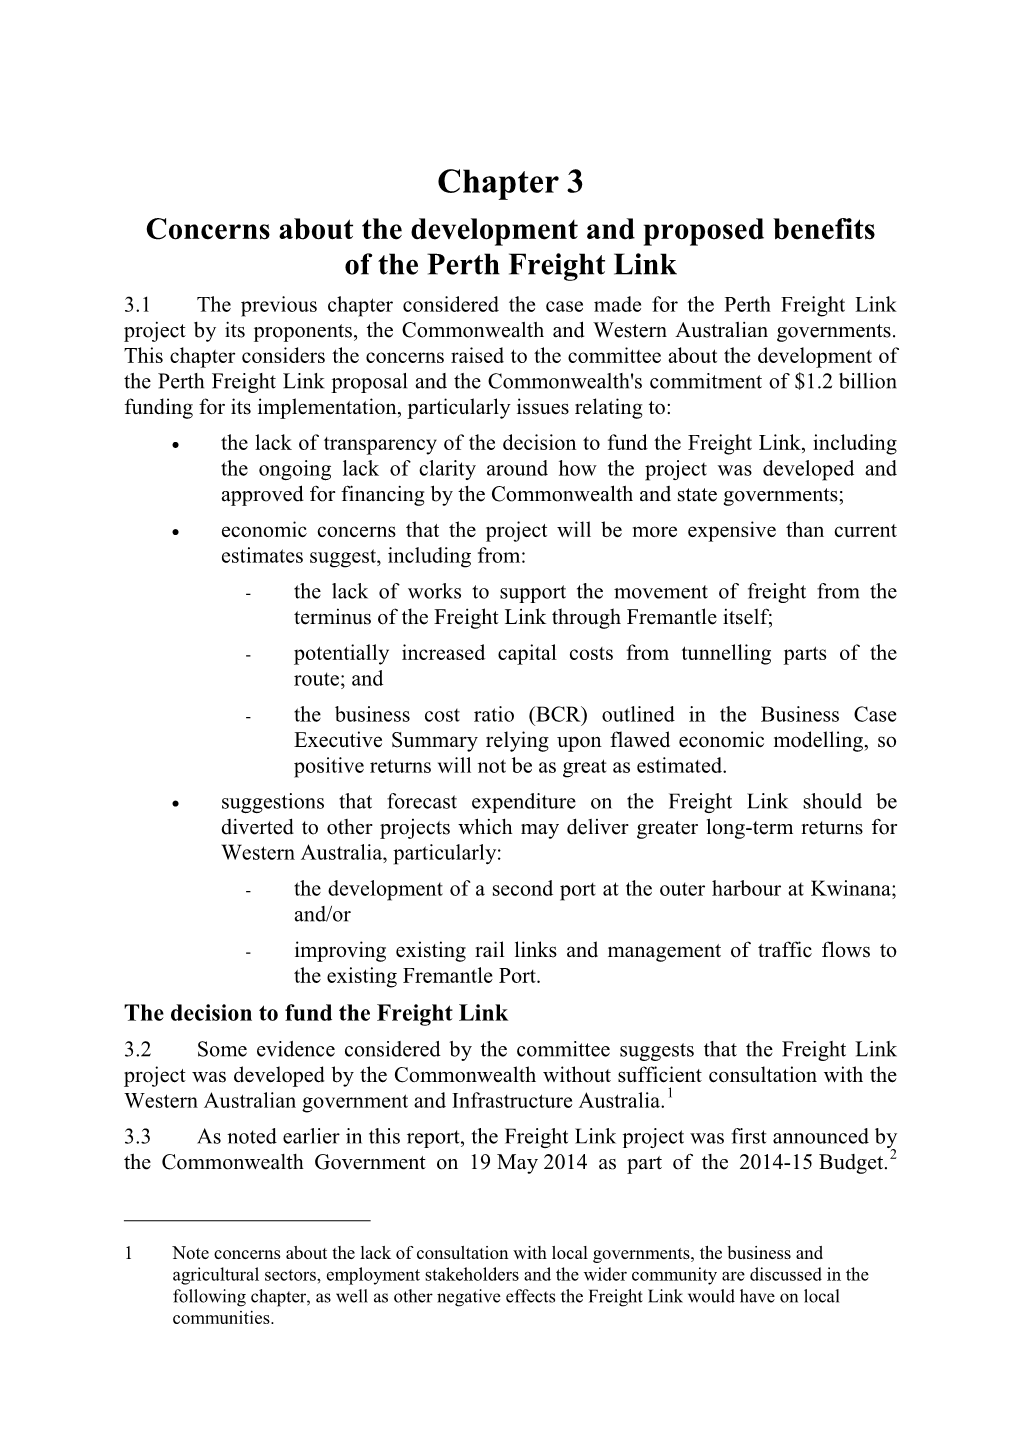 Decision to Commit Funding to the Perth Freight Link Project